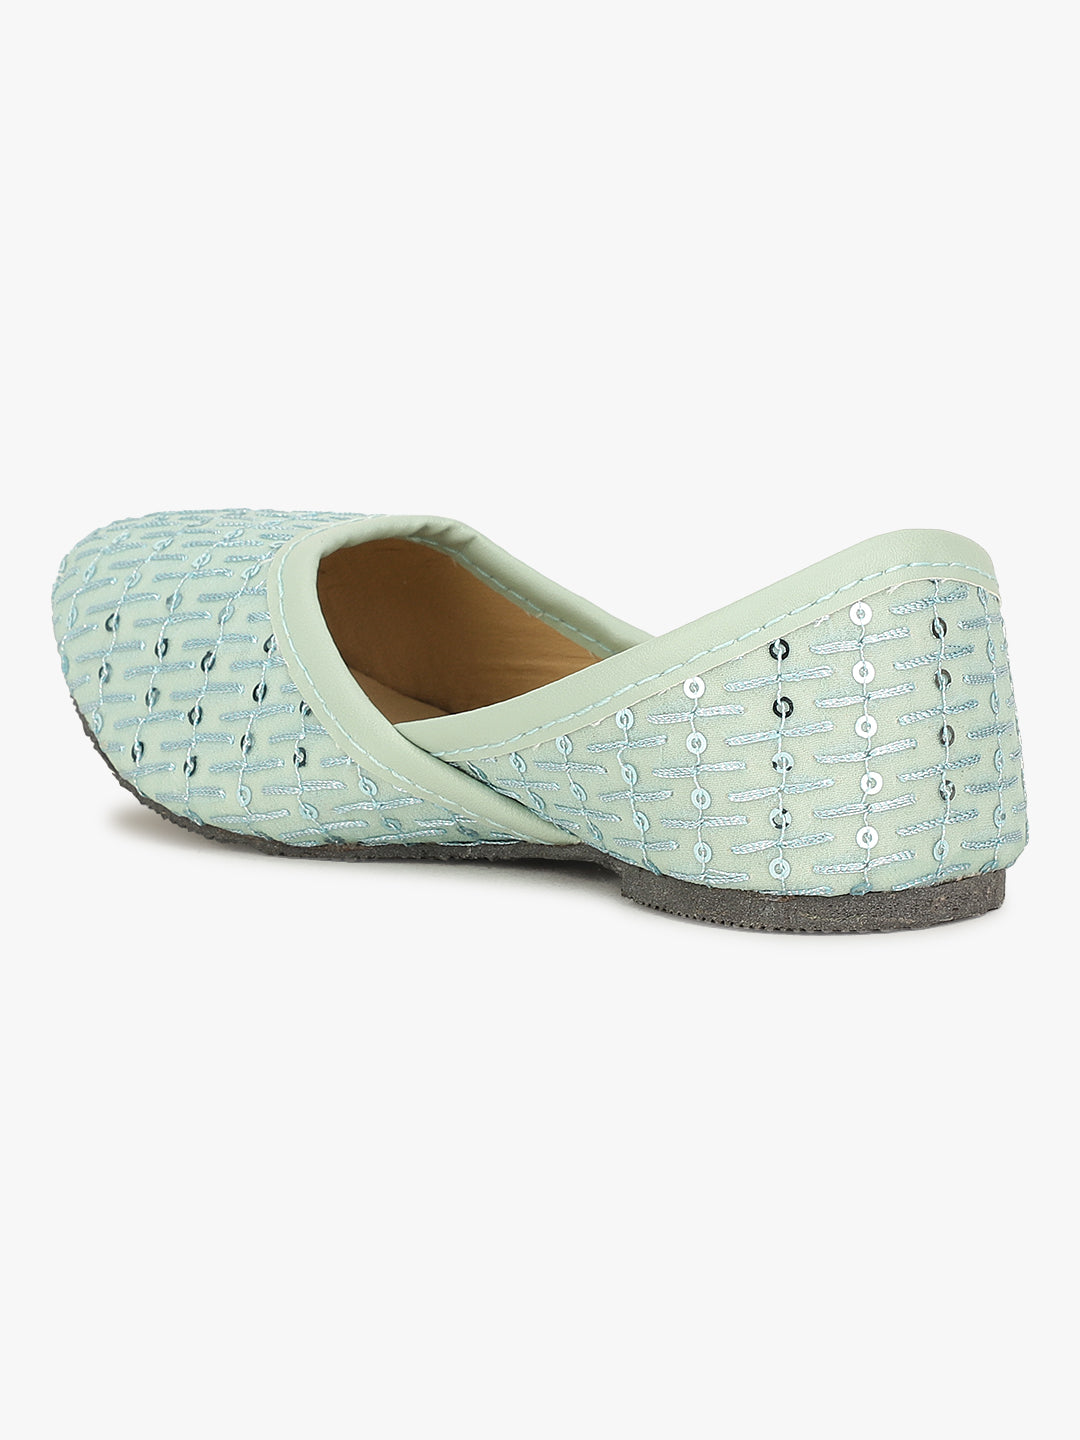 BownBee Embroidered Ethnic Juttis - Sky Blue